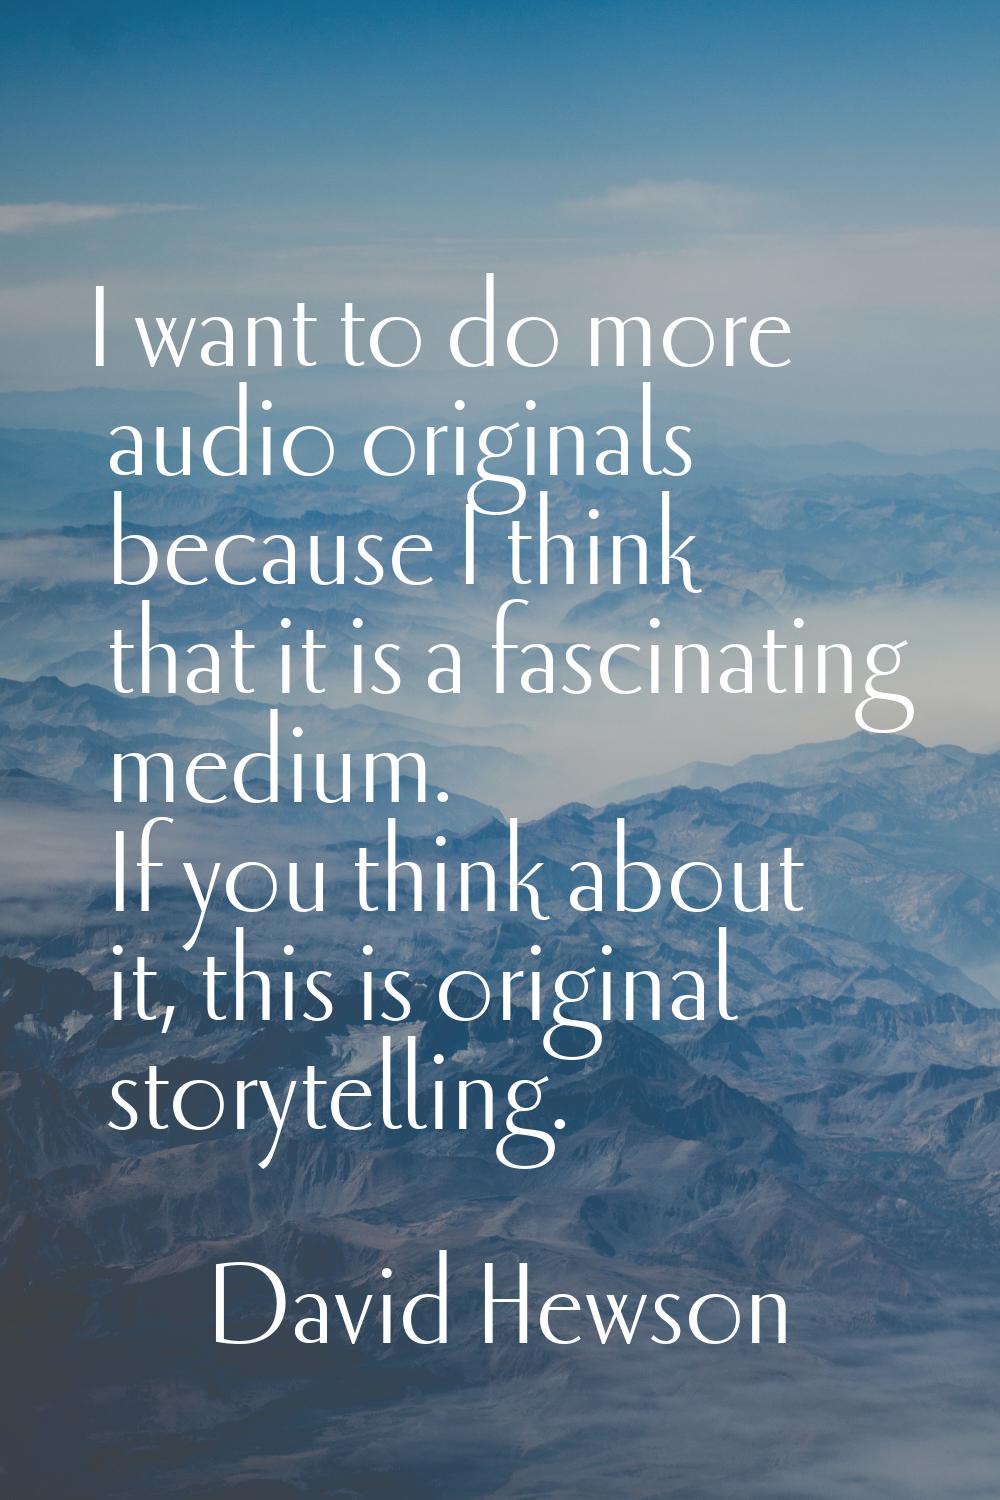 I want to do more audio originals because I think that it is a fascinating medium. If you think abo